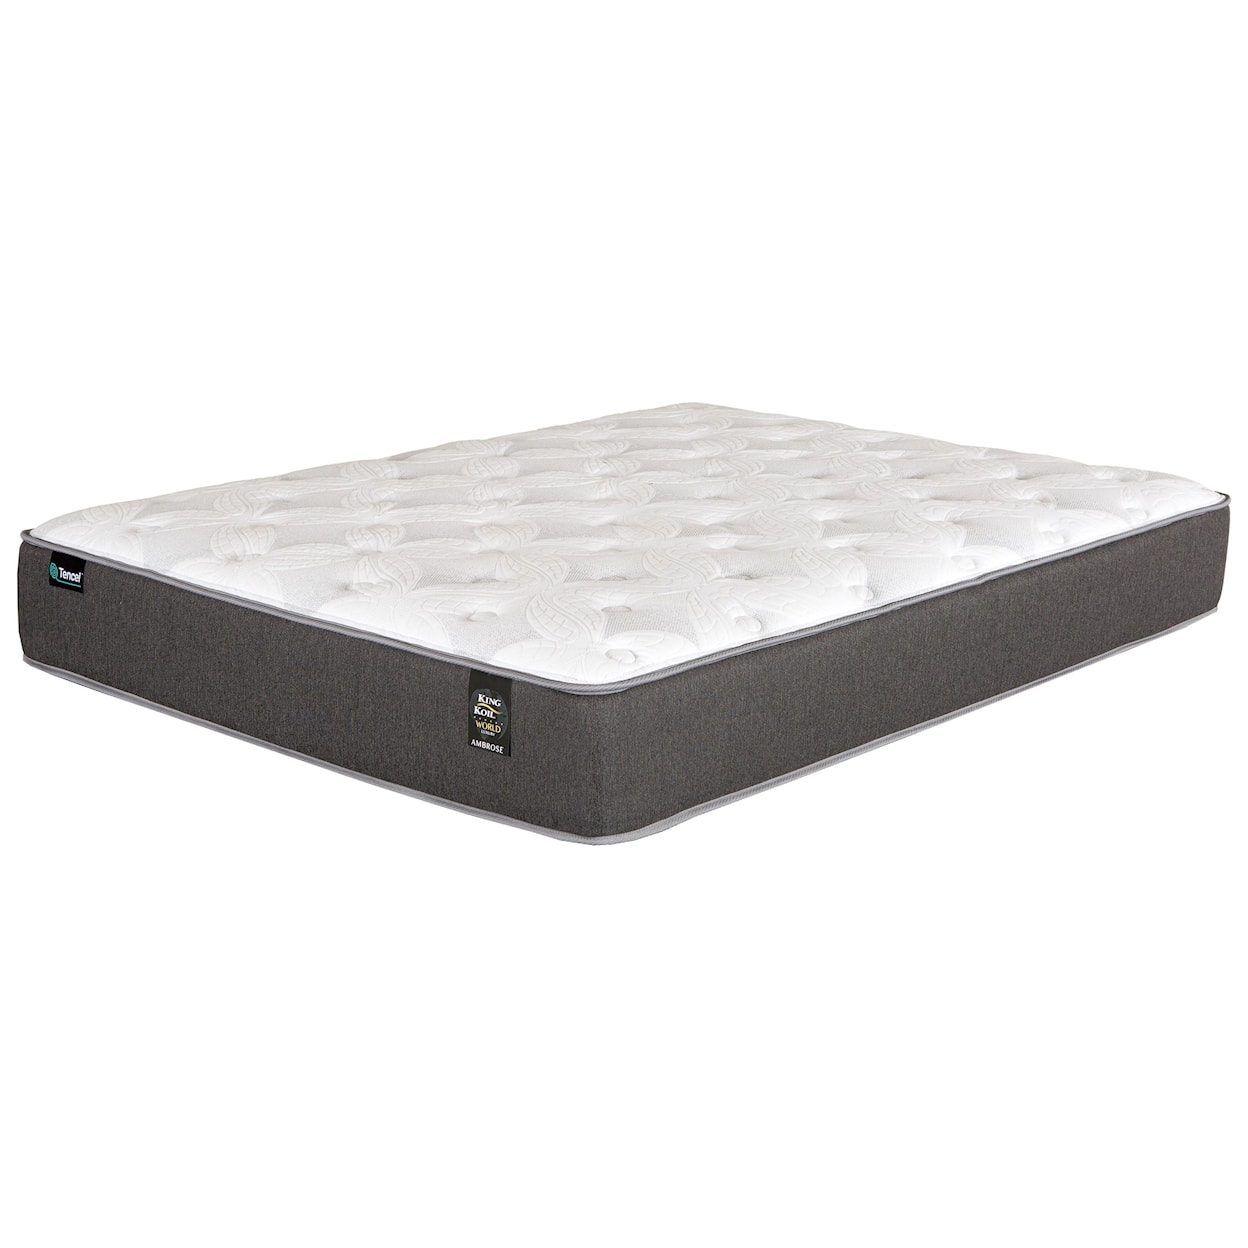 King Koil Lancaster P Twin XL Pocketed Coil Mattress